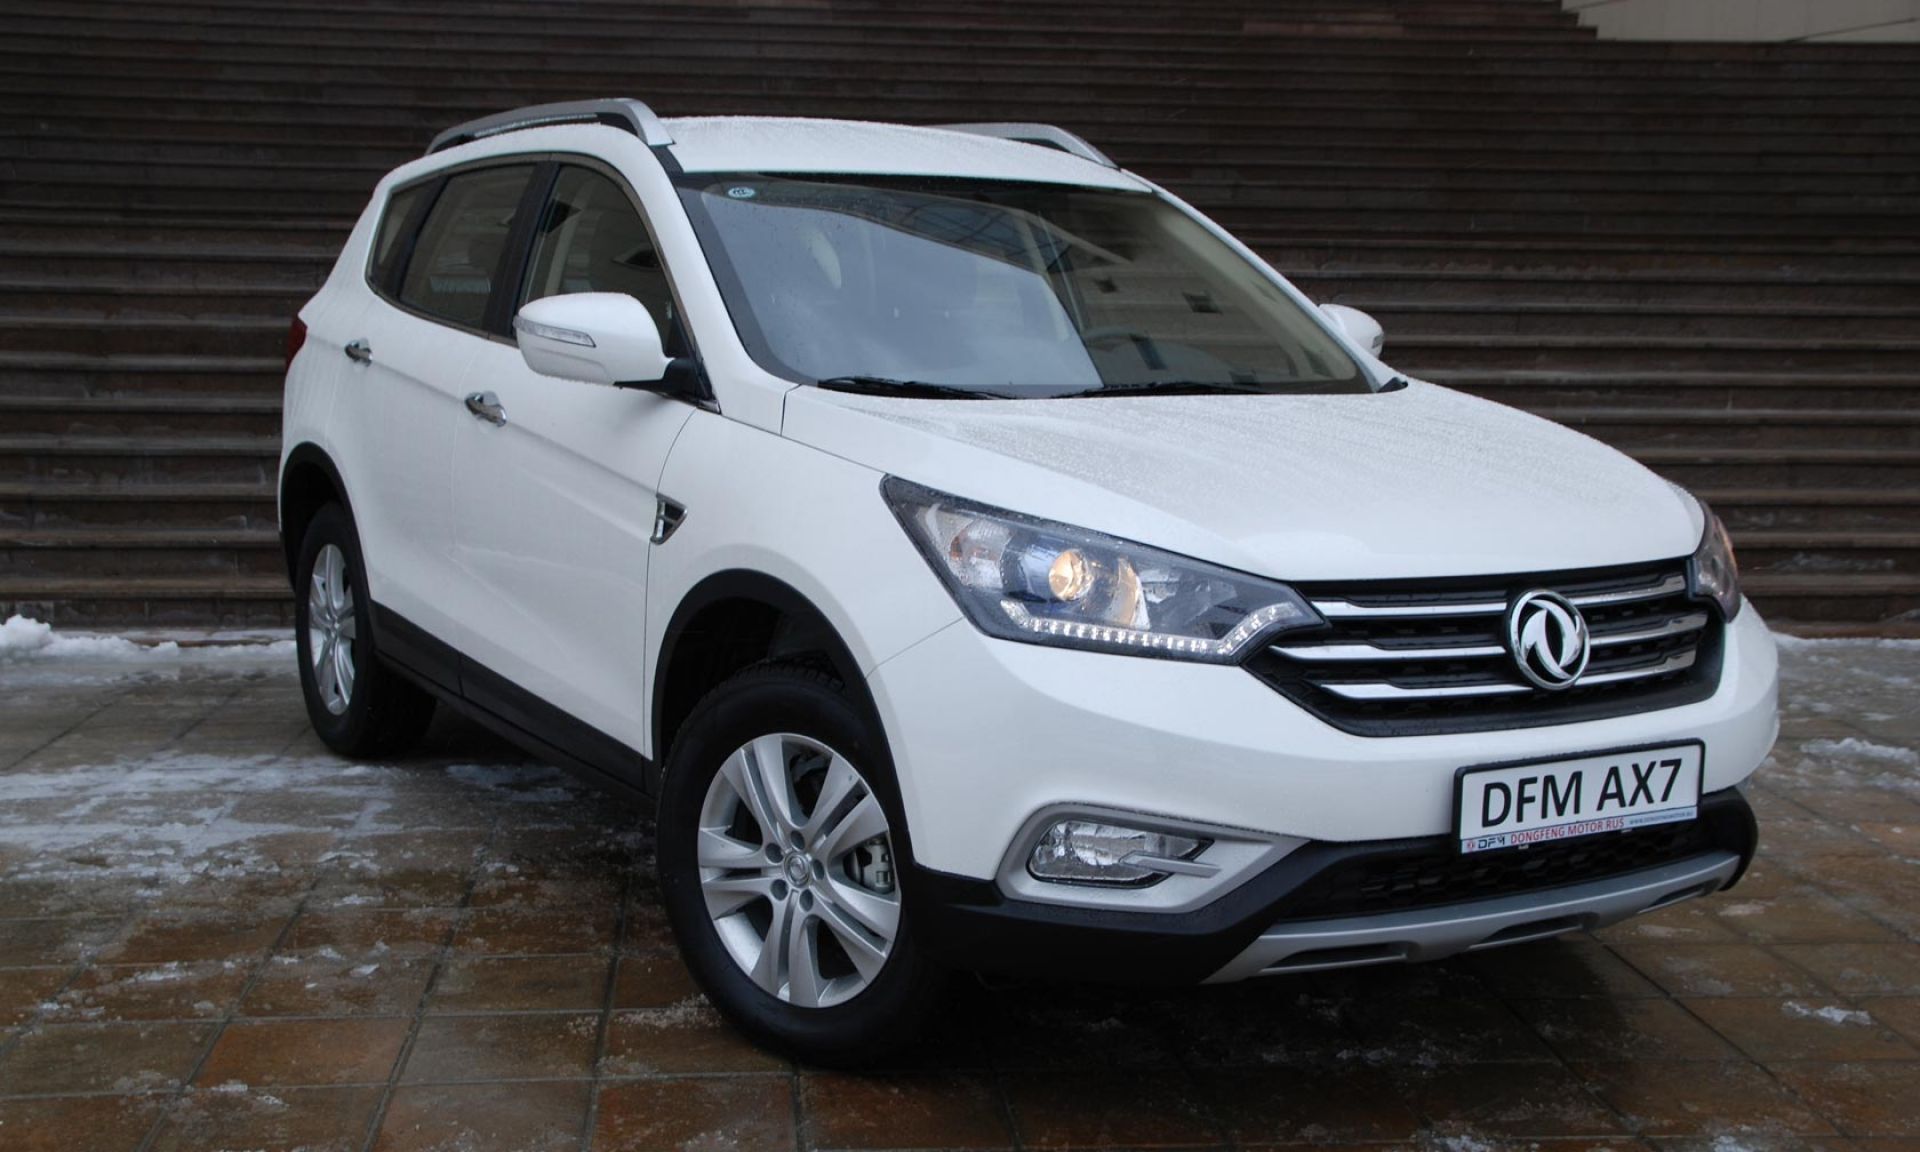 DONGFENG Ax7